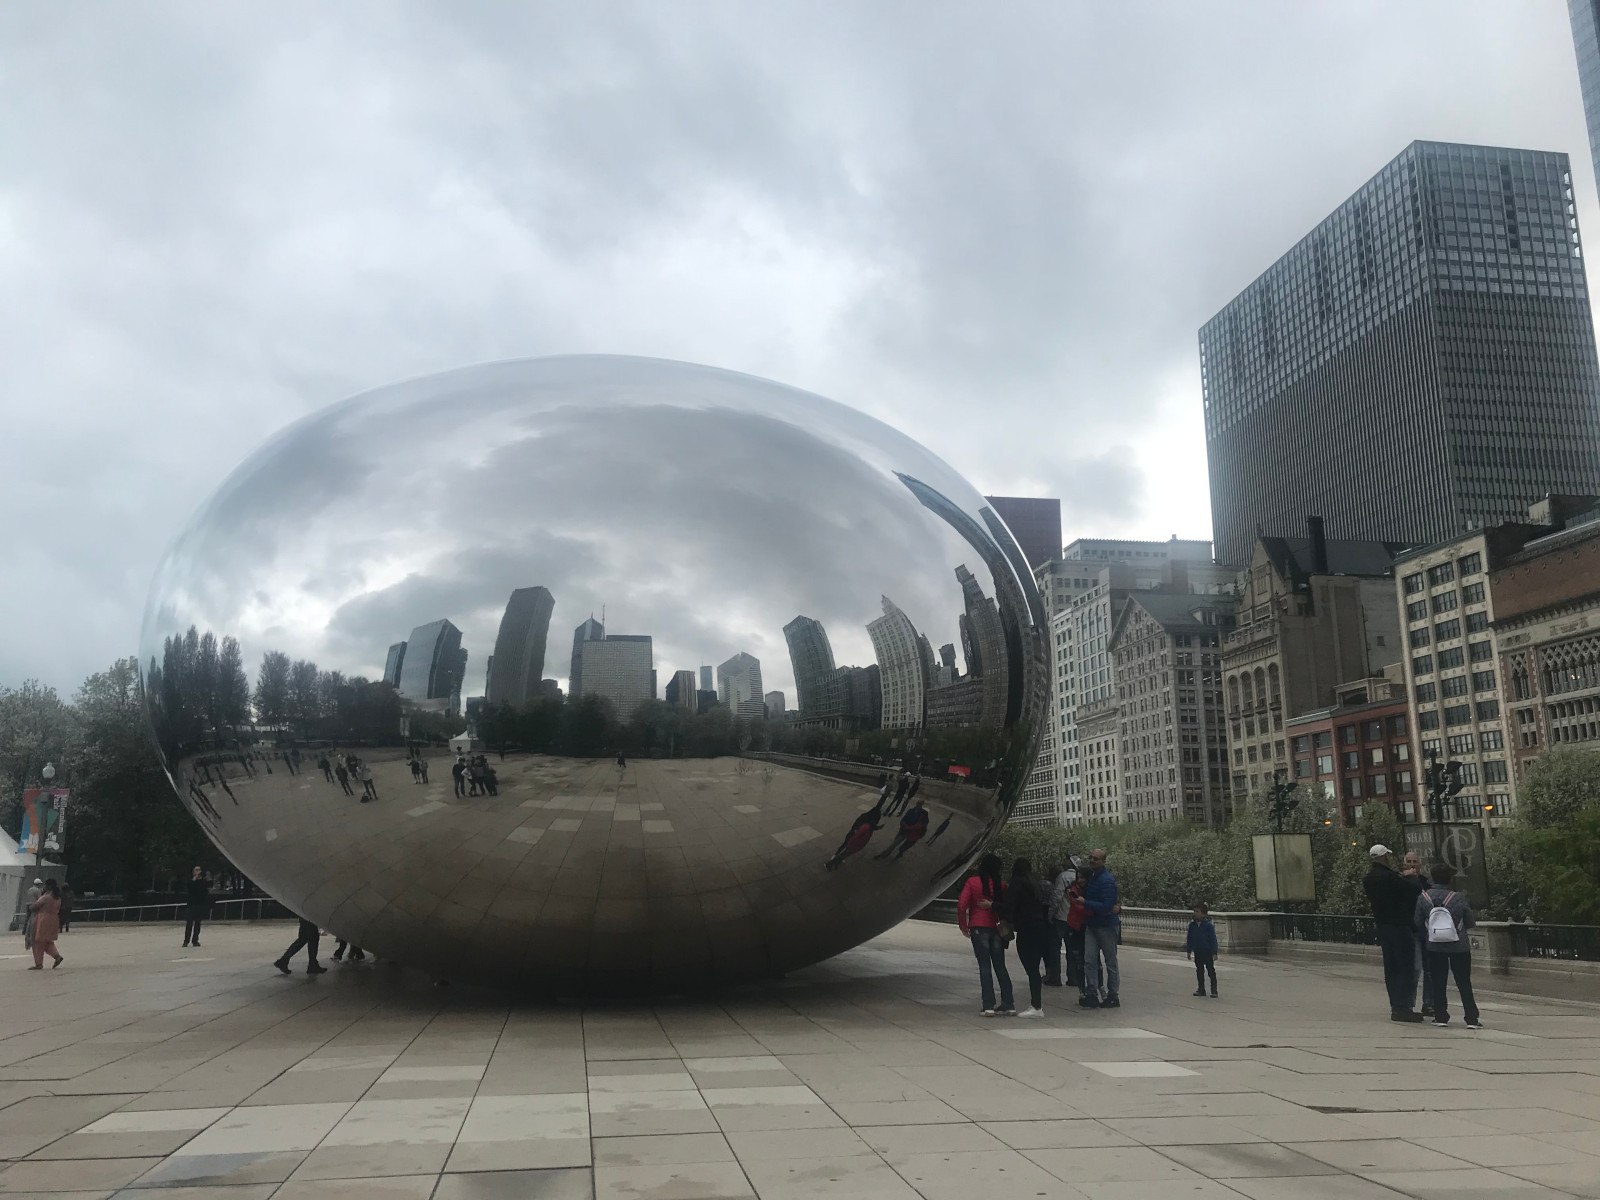 The Ultimate Chicago Travel Guide – Top Attractions & Recommendations – Earth’s Attractions